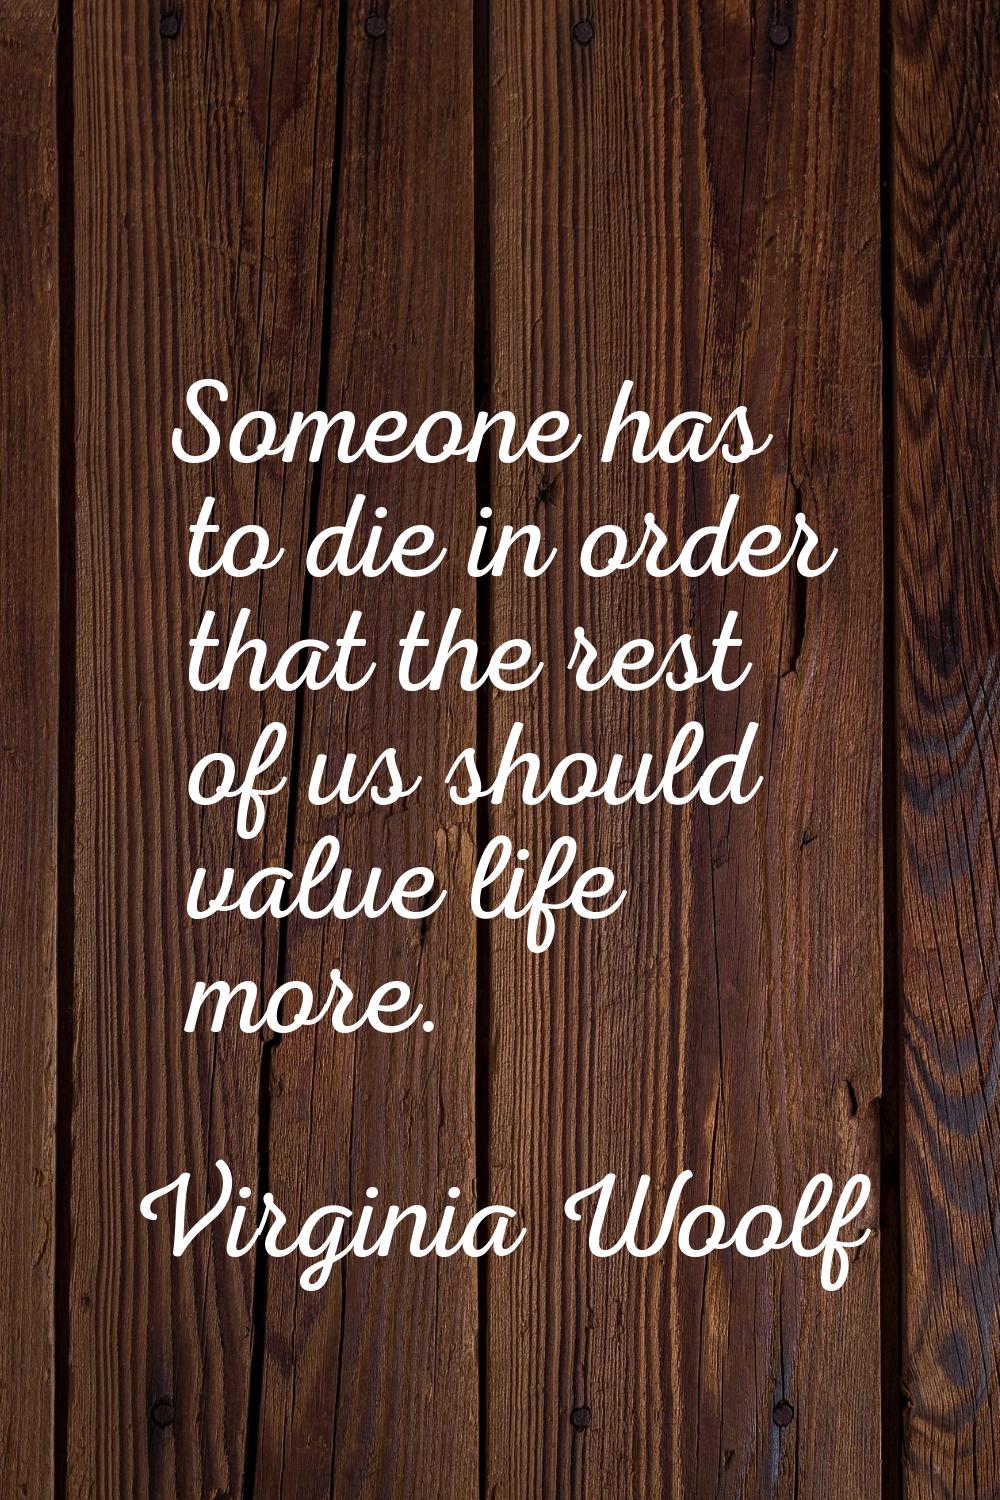 Someone has to die in order that the rest of us should value life more.